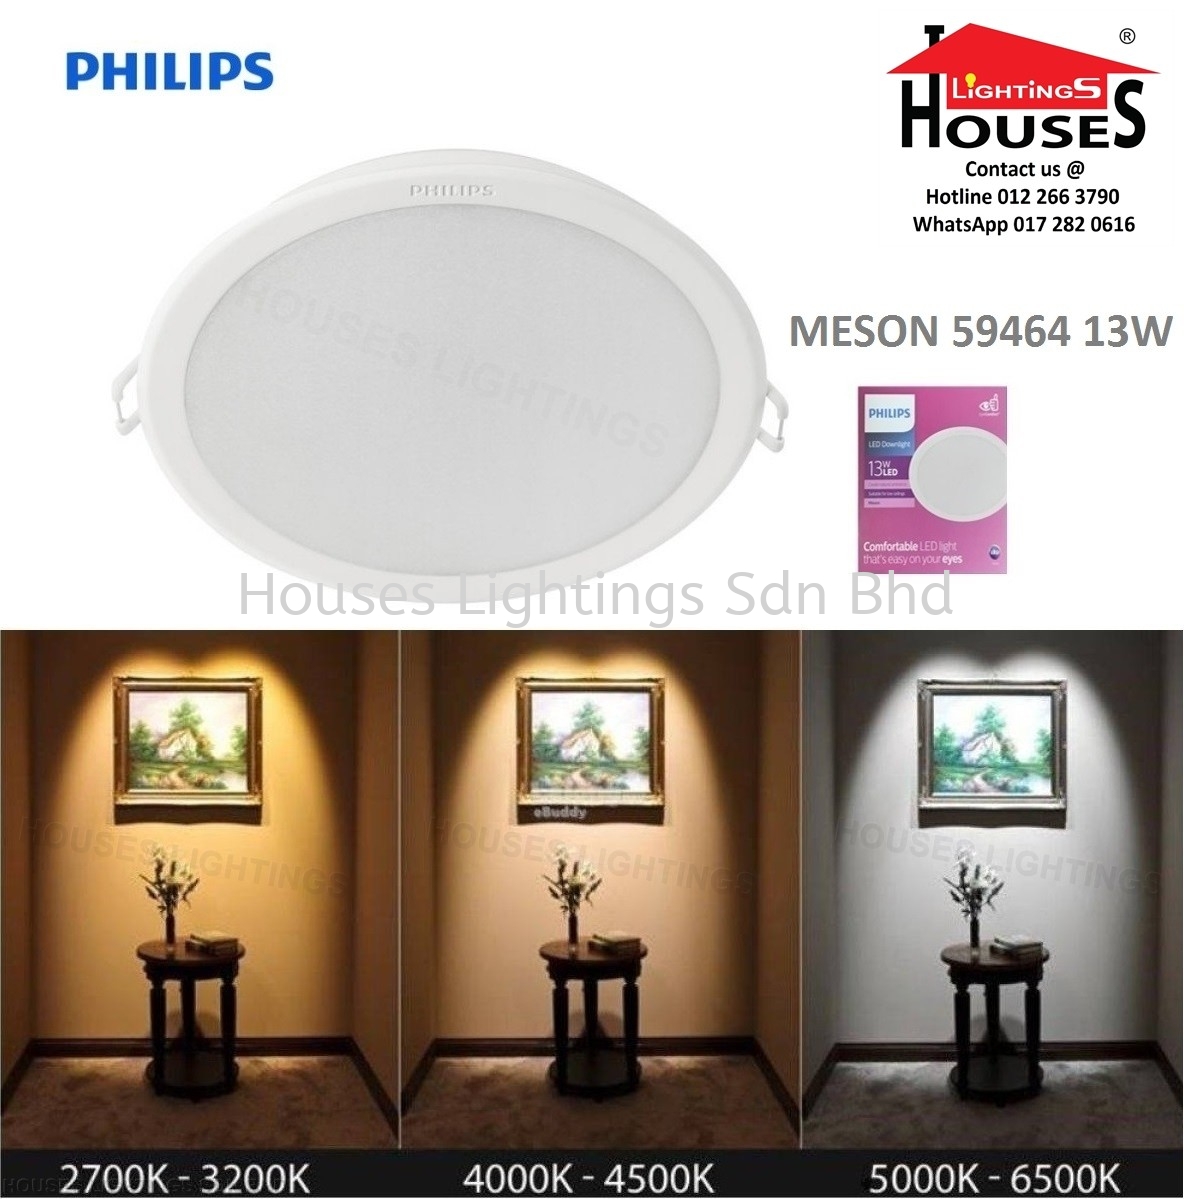 PHILIPS MESON 59464 13W Philips Led Downlight Selangor, Malaysia, Kuala  Lumpur (KL), Puchong Supplier, Suppliers, Supply,